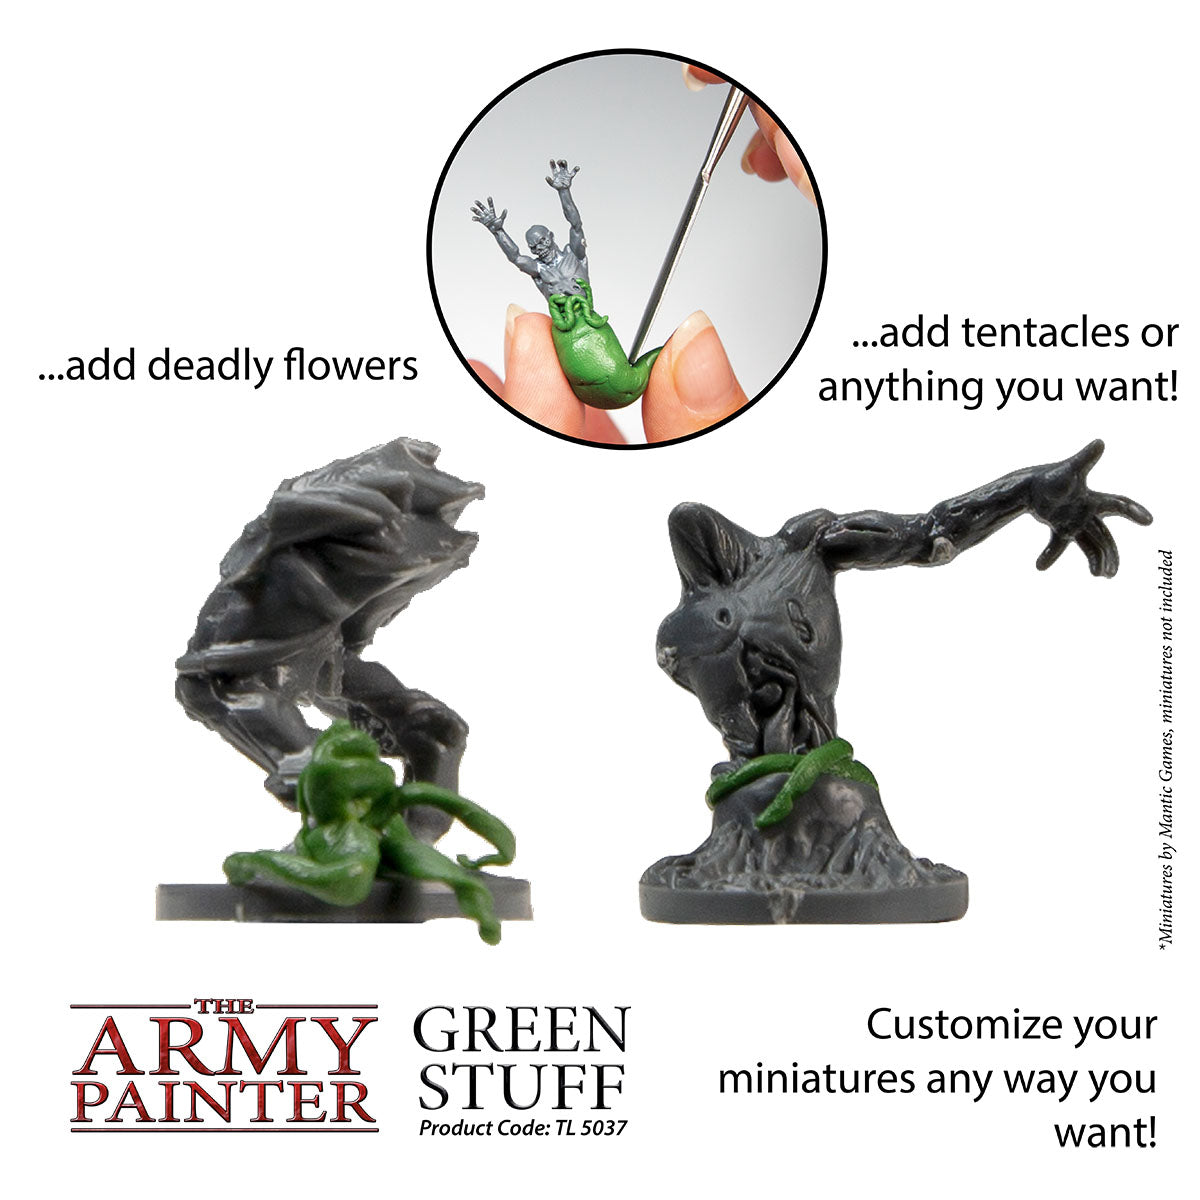 Green Stuff (or Kneadatite). Perfect for mold & sculpting miniatures!